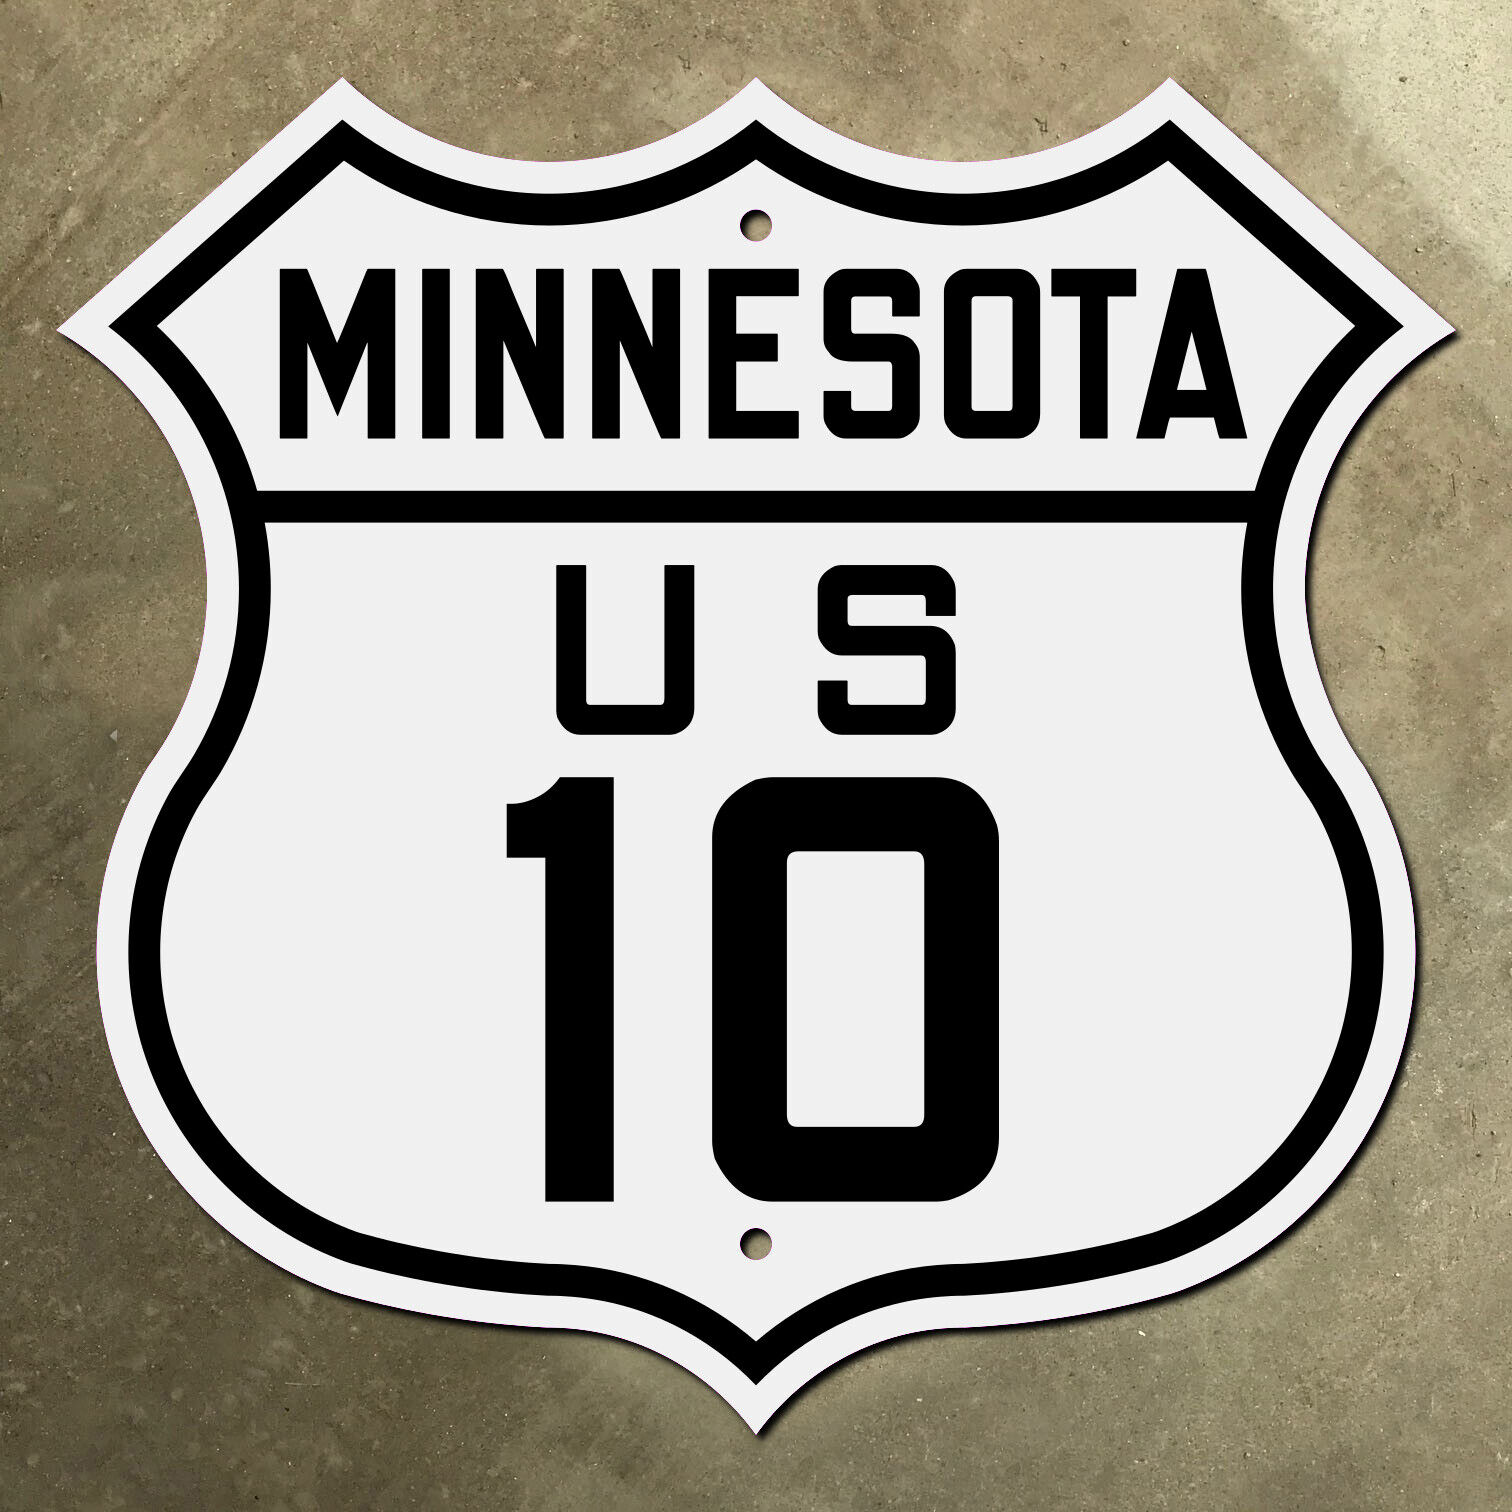 Minnesota US 10 Minneapolis St. Paul highway route marker 1926 road sign 16x16